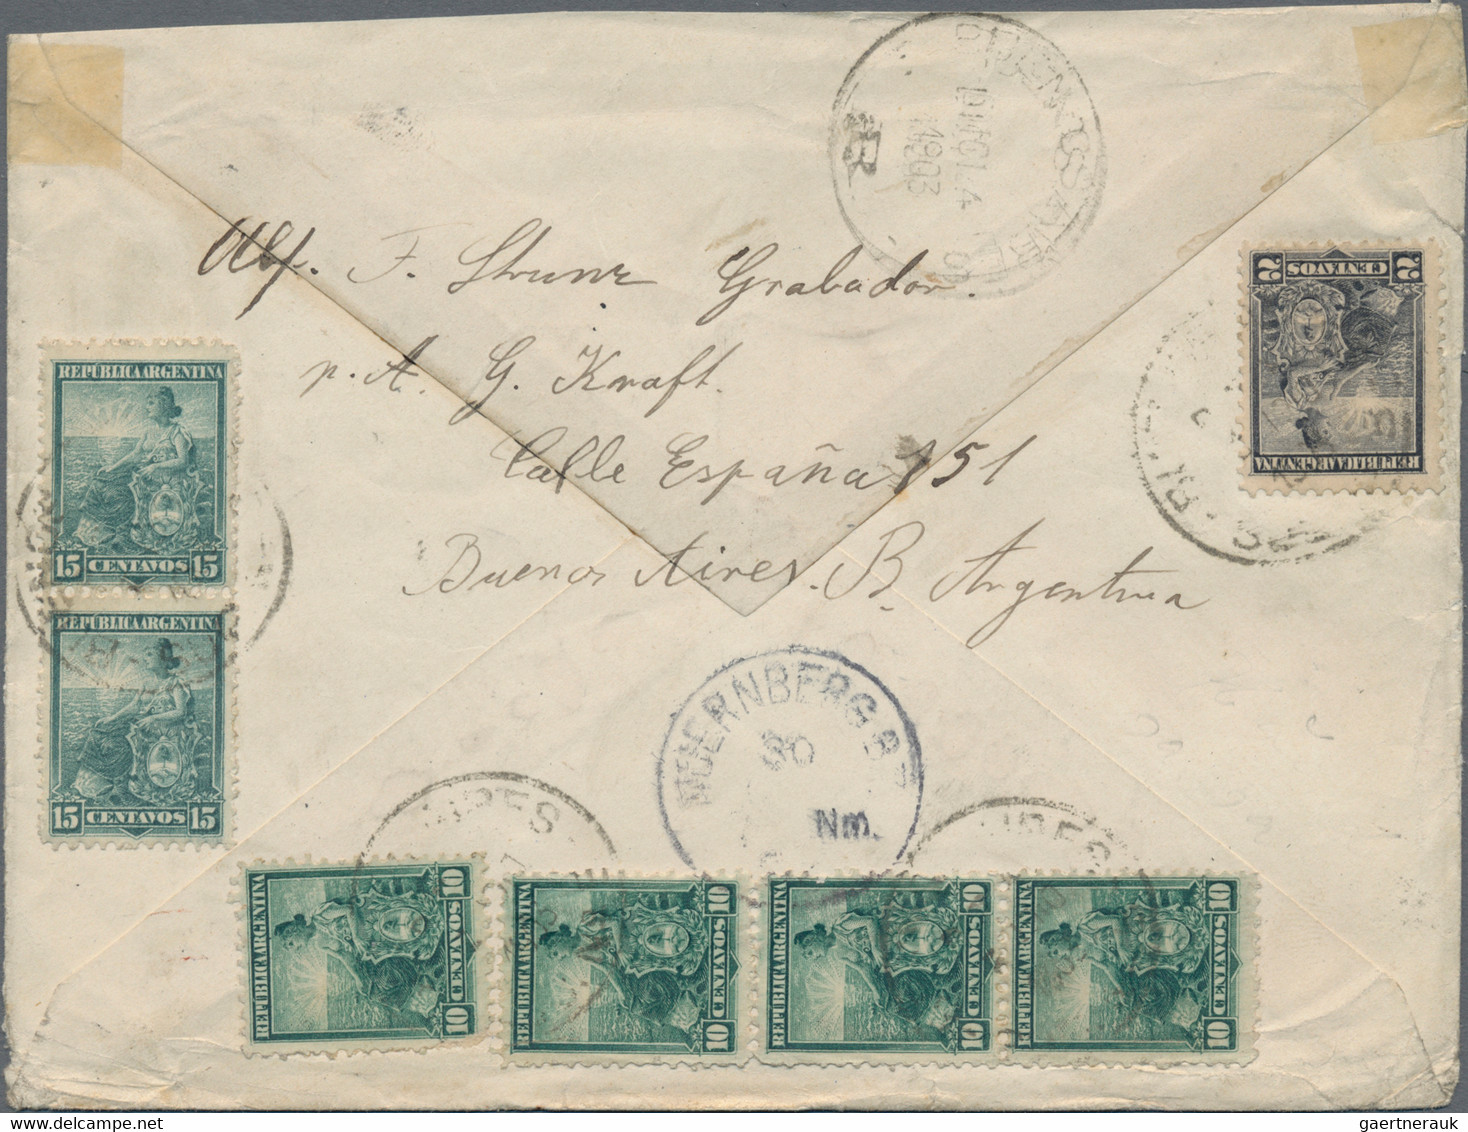 Argentina: 1888/1910, assortment of 17 covers/used stationeries and one front of